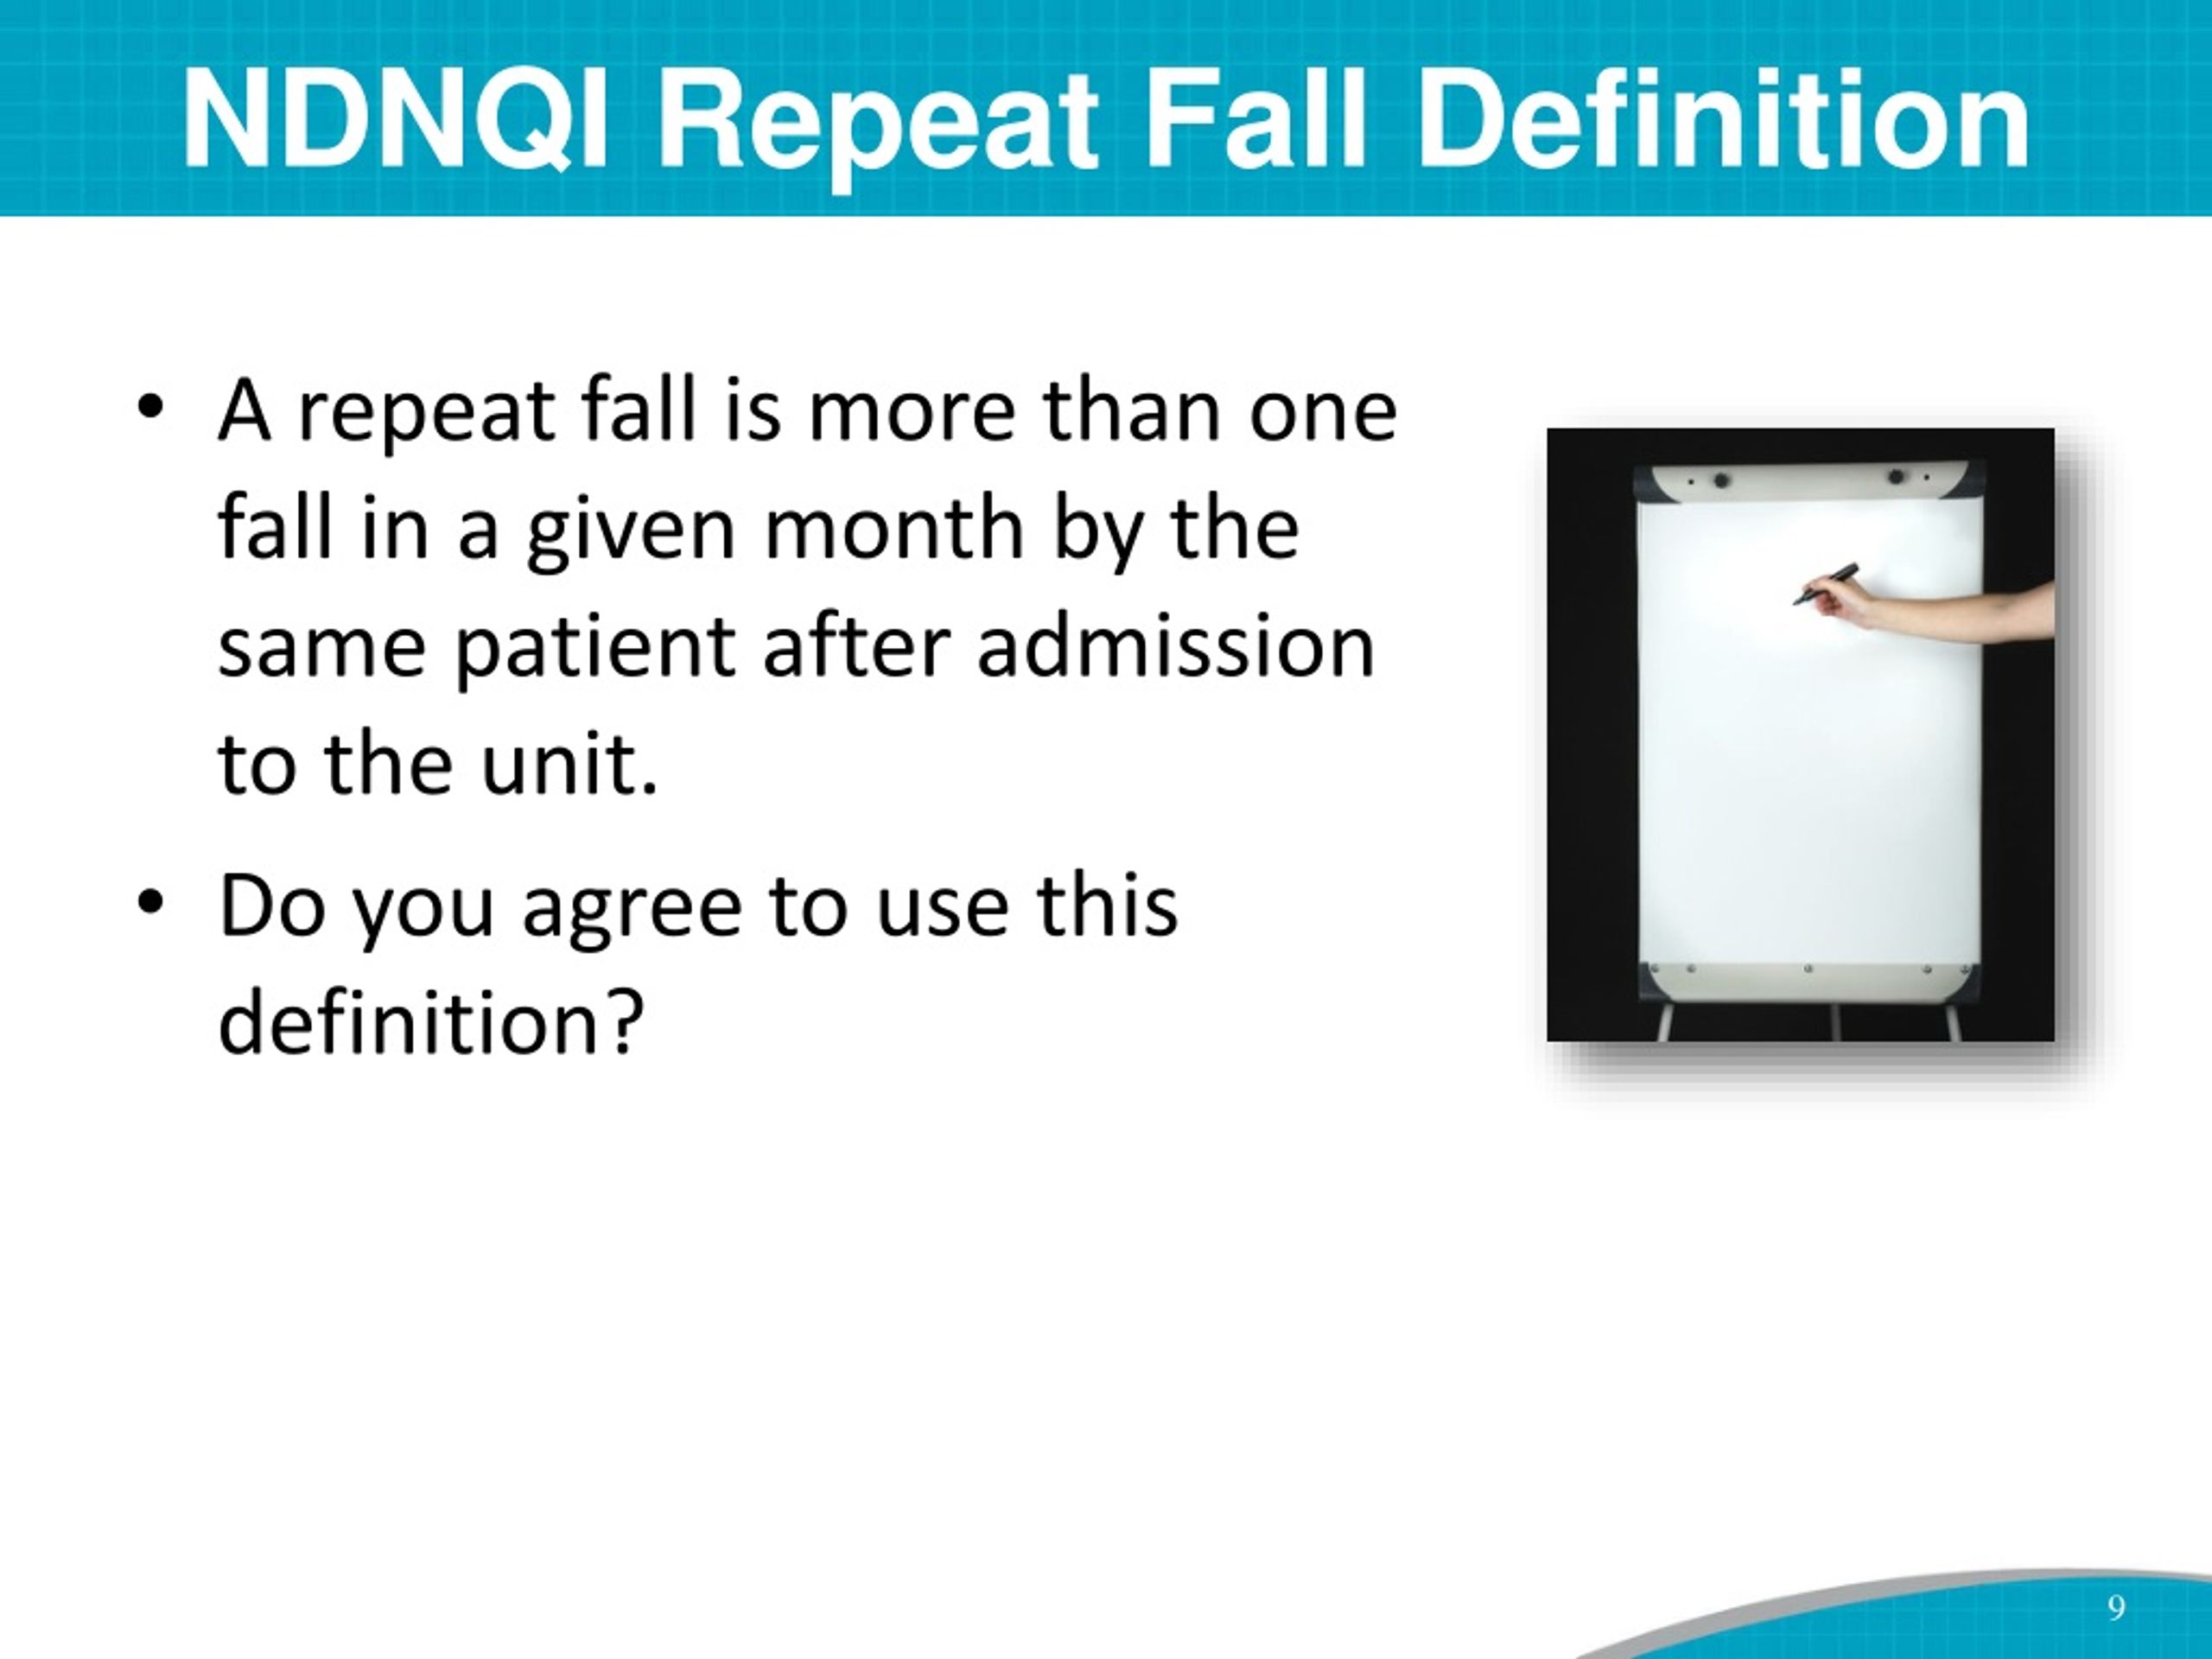 PPT How To Measure Fall Rates and Fall Prevention Practices